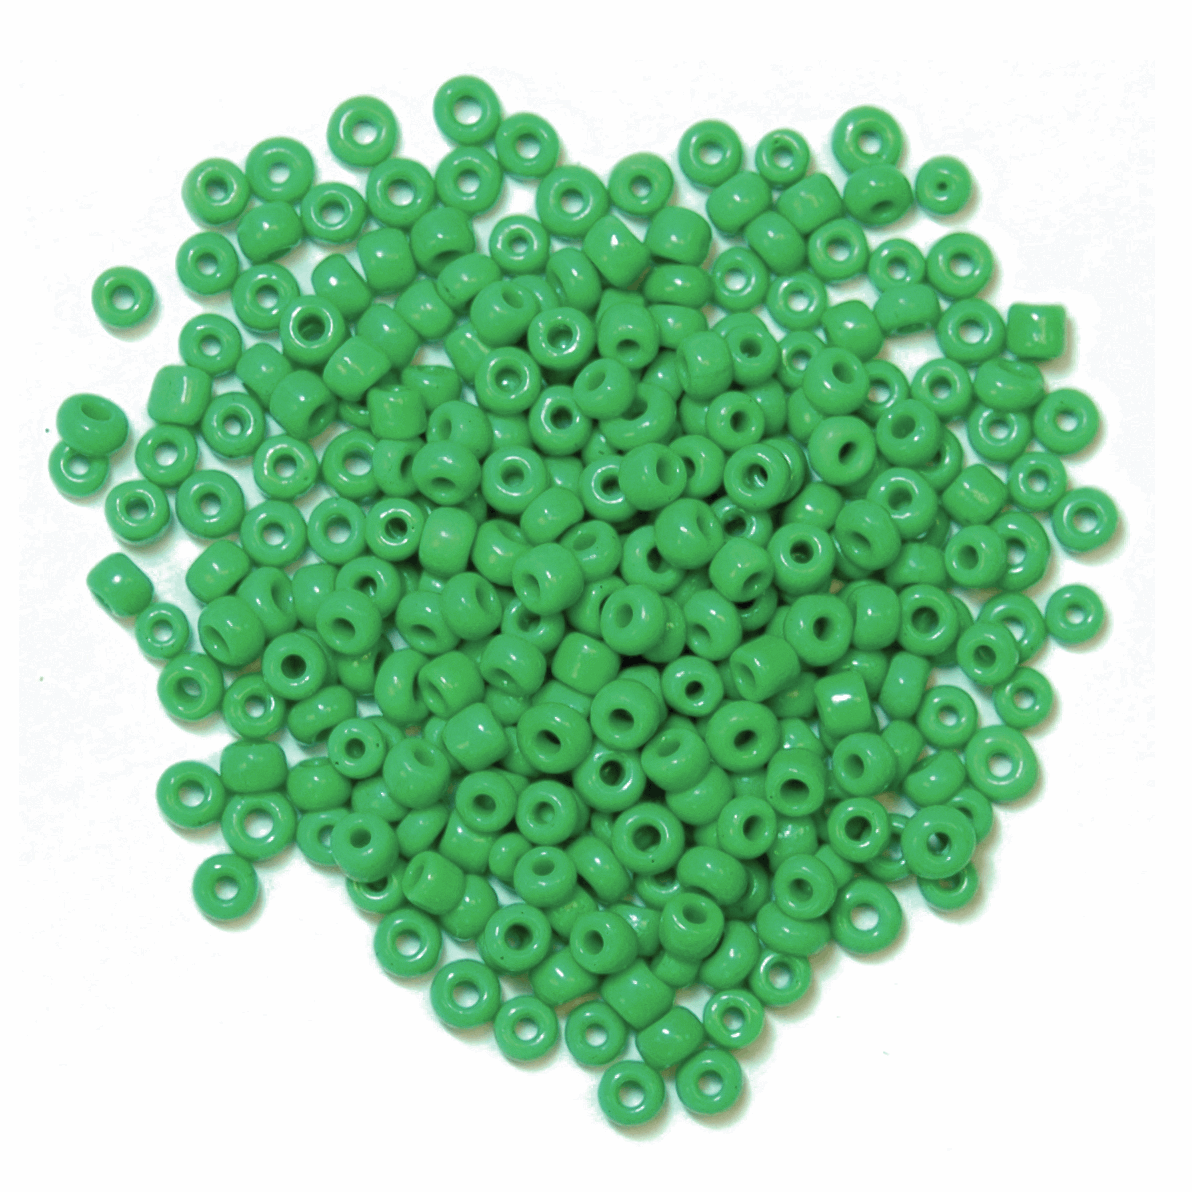 Trimits Green Seed Beads - 8g Pack